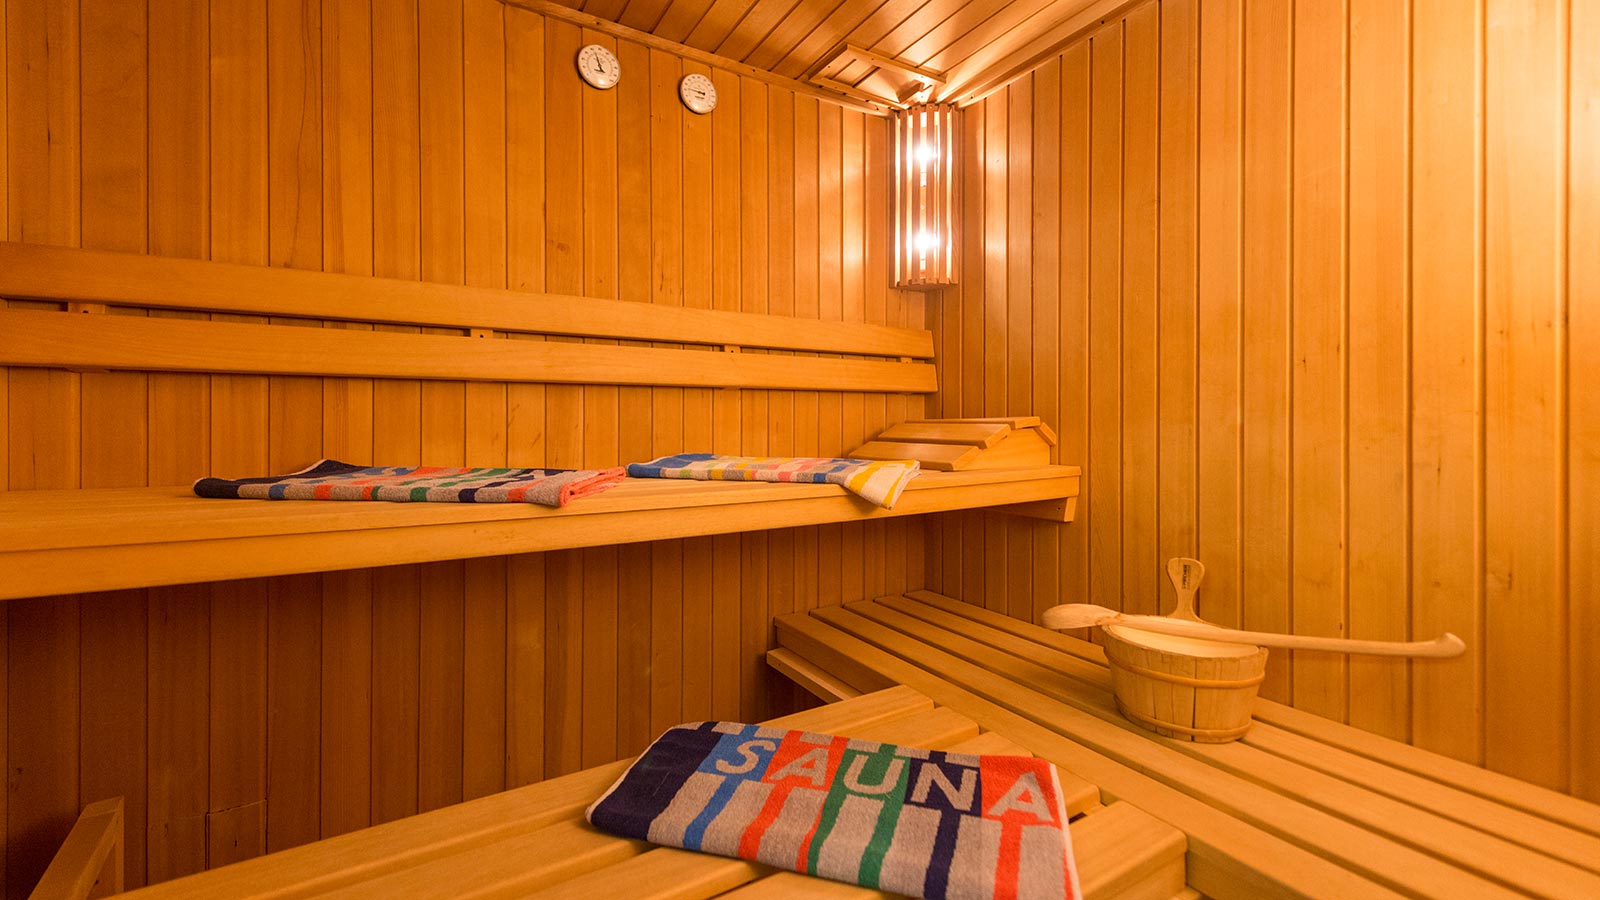 Finnish sauna in wellness area to relax mind and body